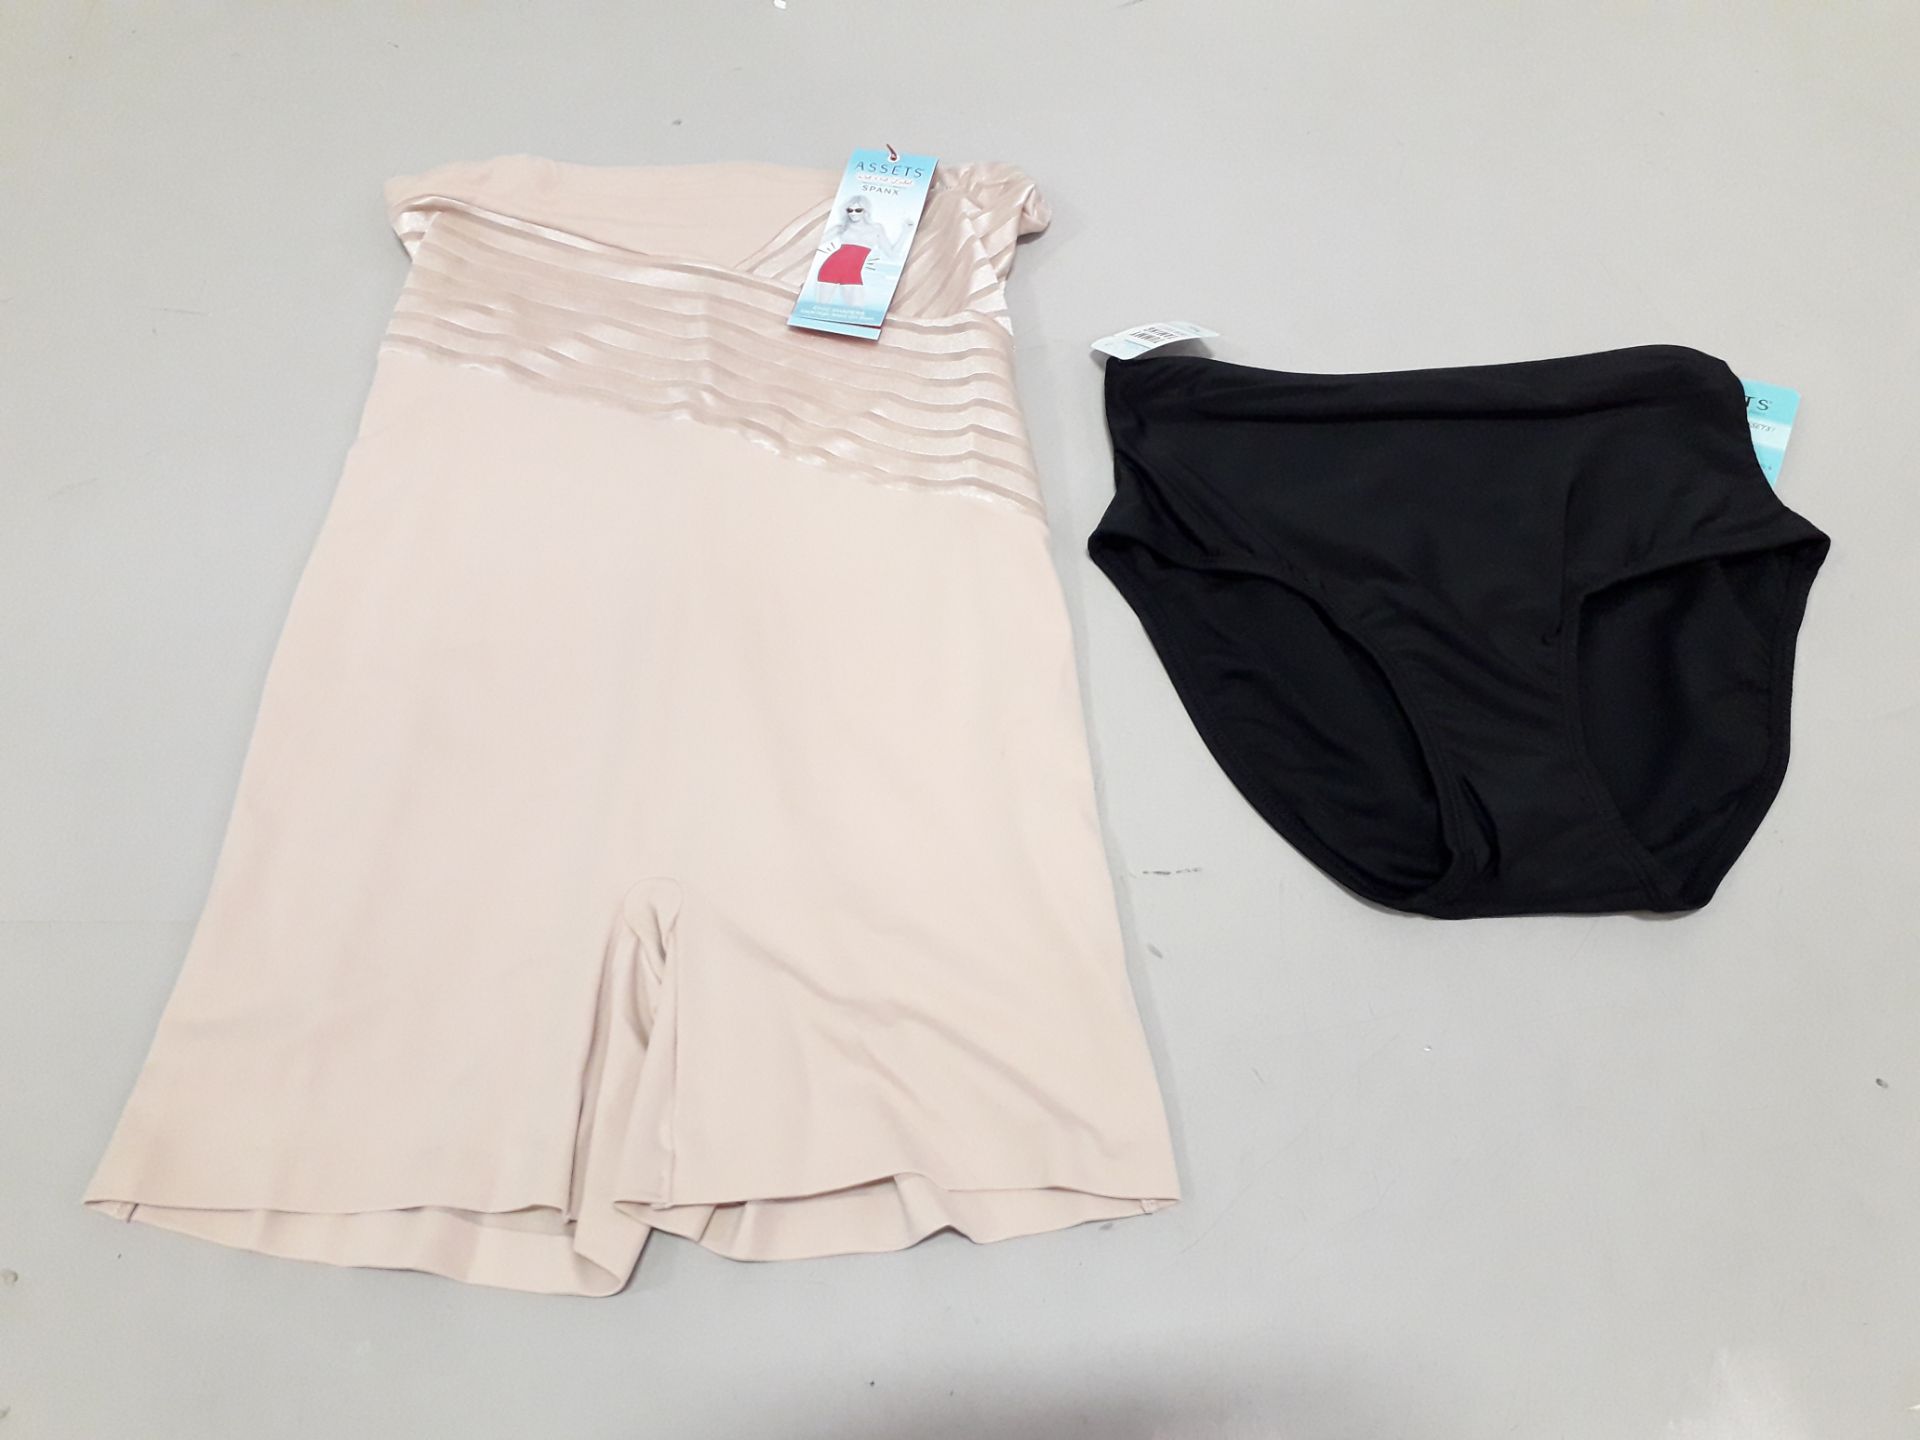 17 PIECE SPANX LOT CONTAINING 8 X GLAM HIGH-WAIST GIRL SHORTS IN NUDE COLOUR ( SIZE 3X ) RRP $ 46.00